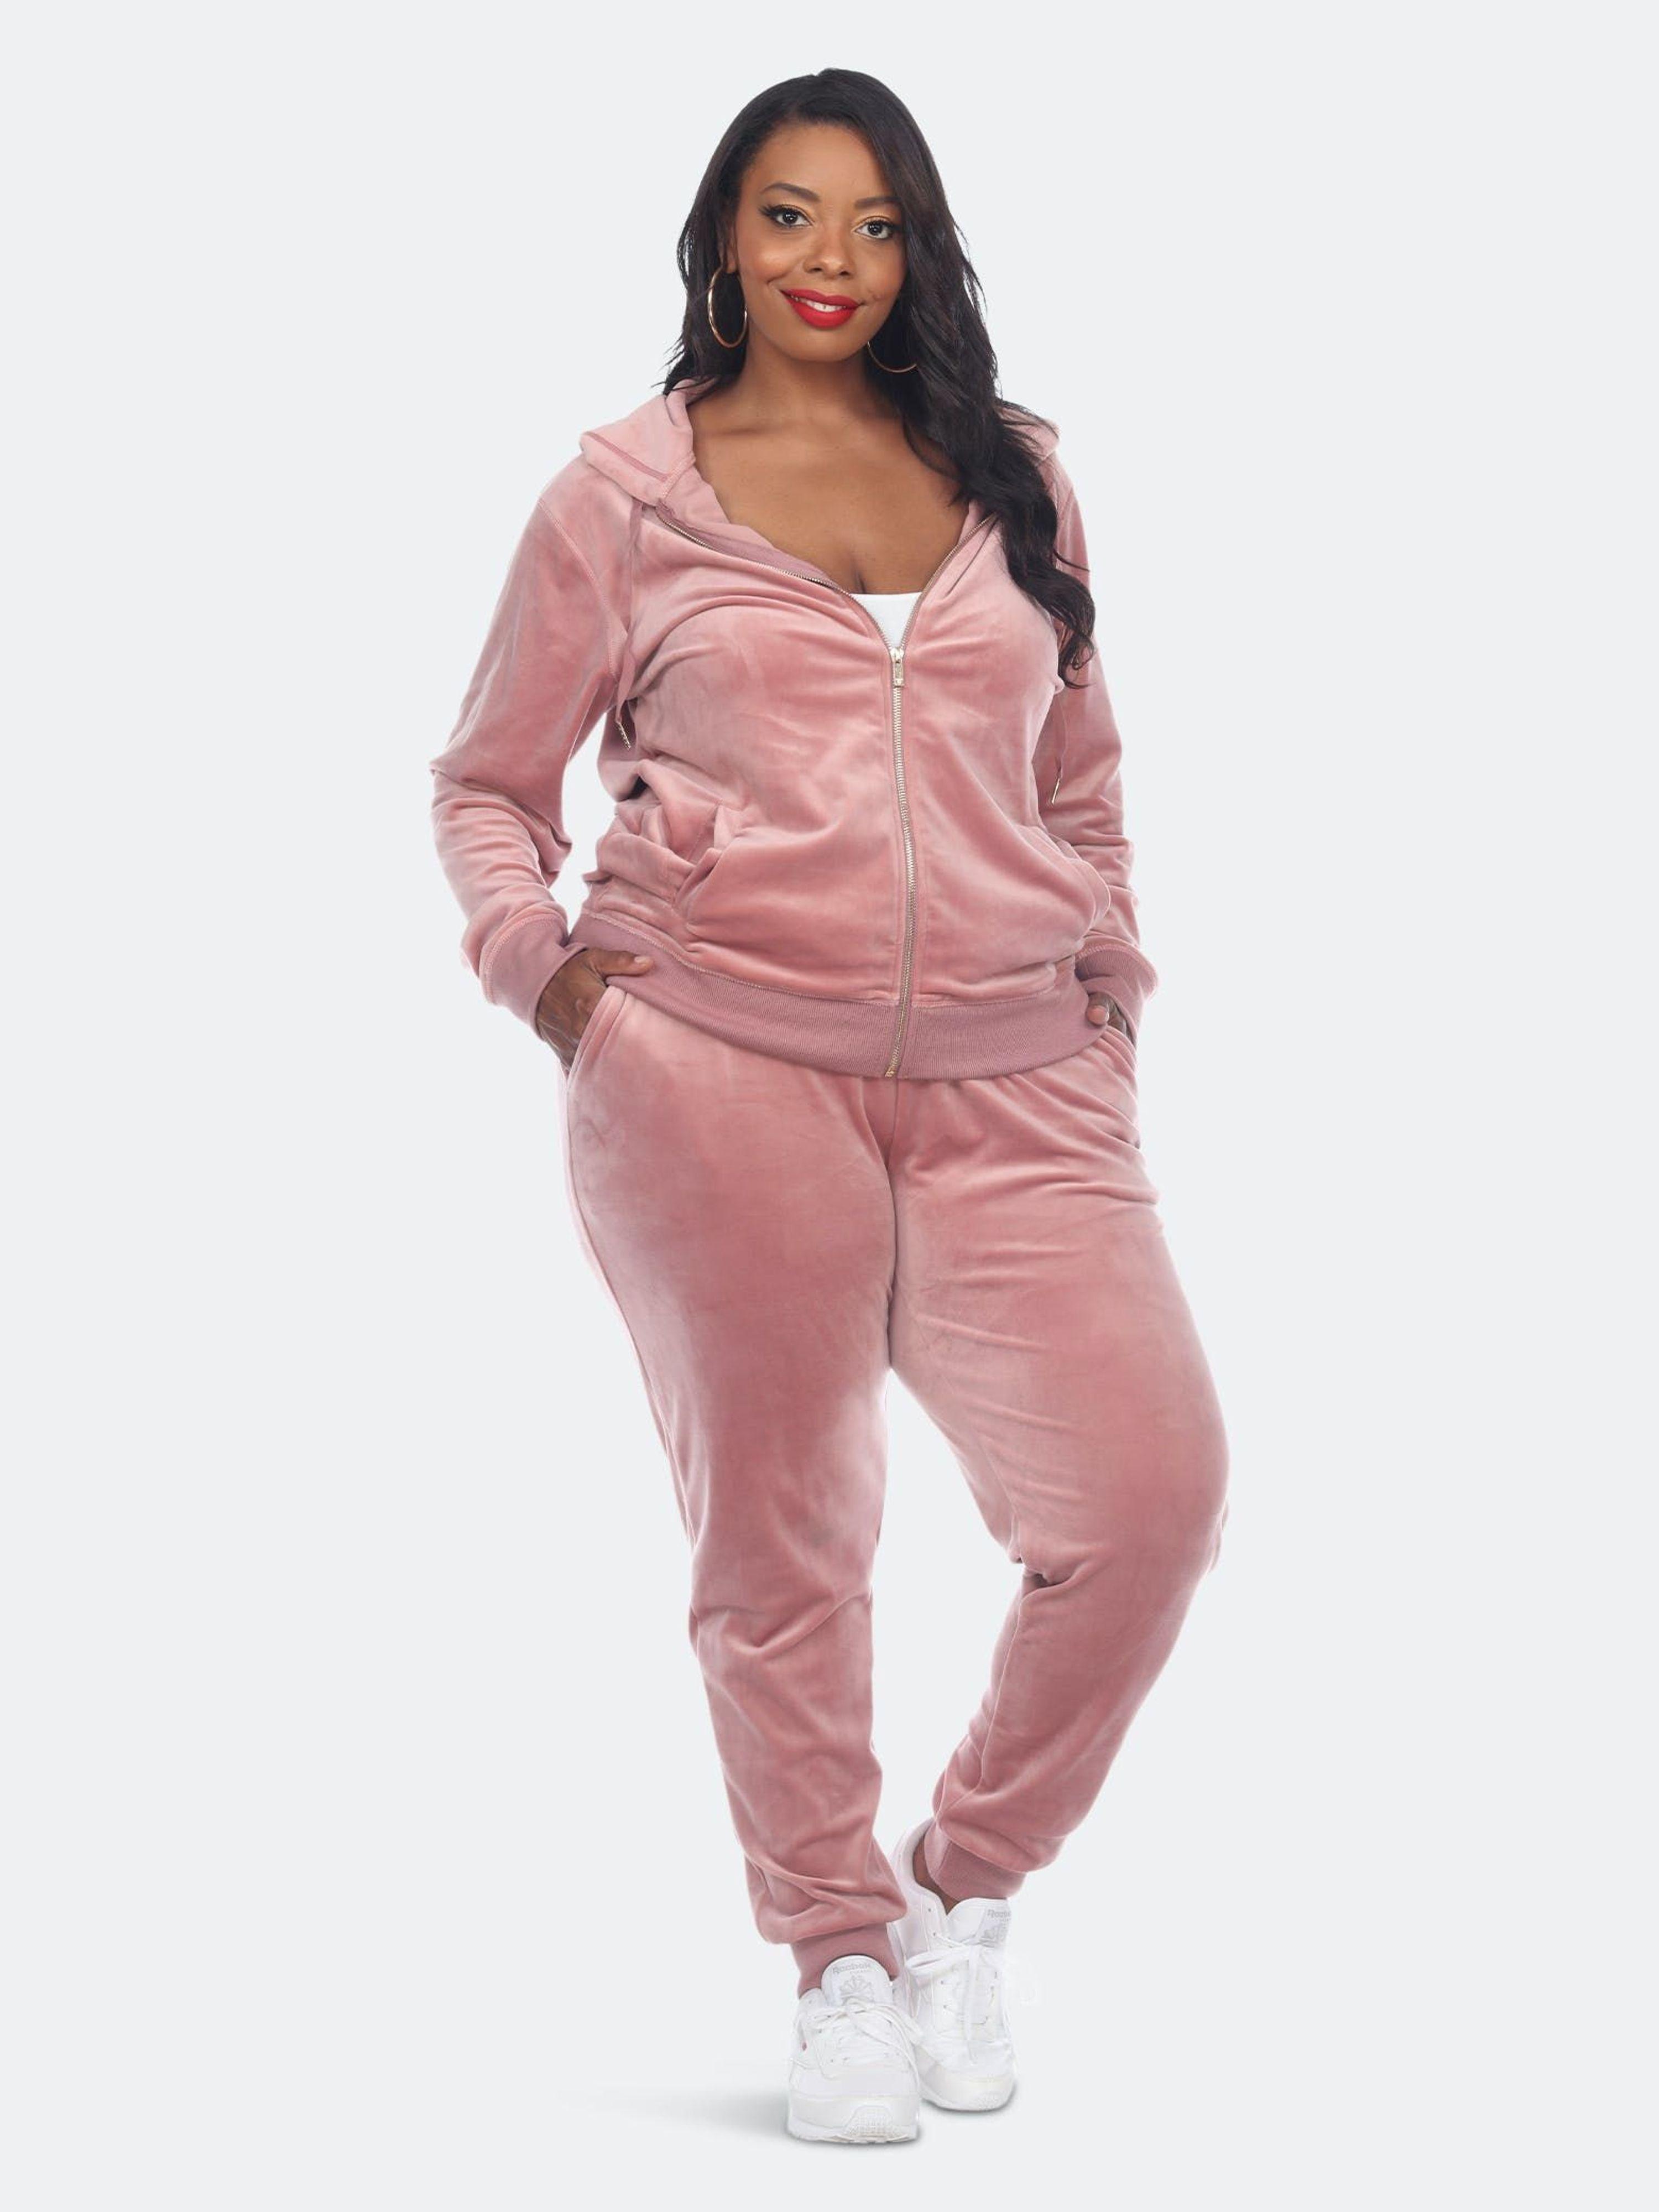 White Mark Plus Size 2 Piece Velour Tracksuit Set in Pink | Lyst